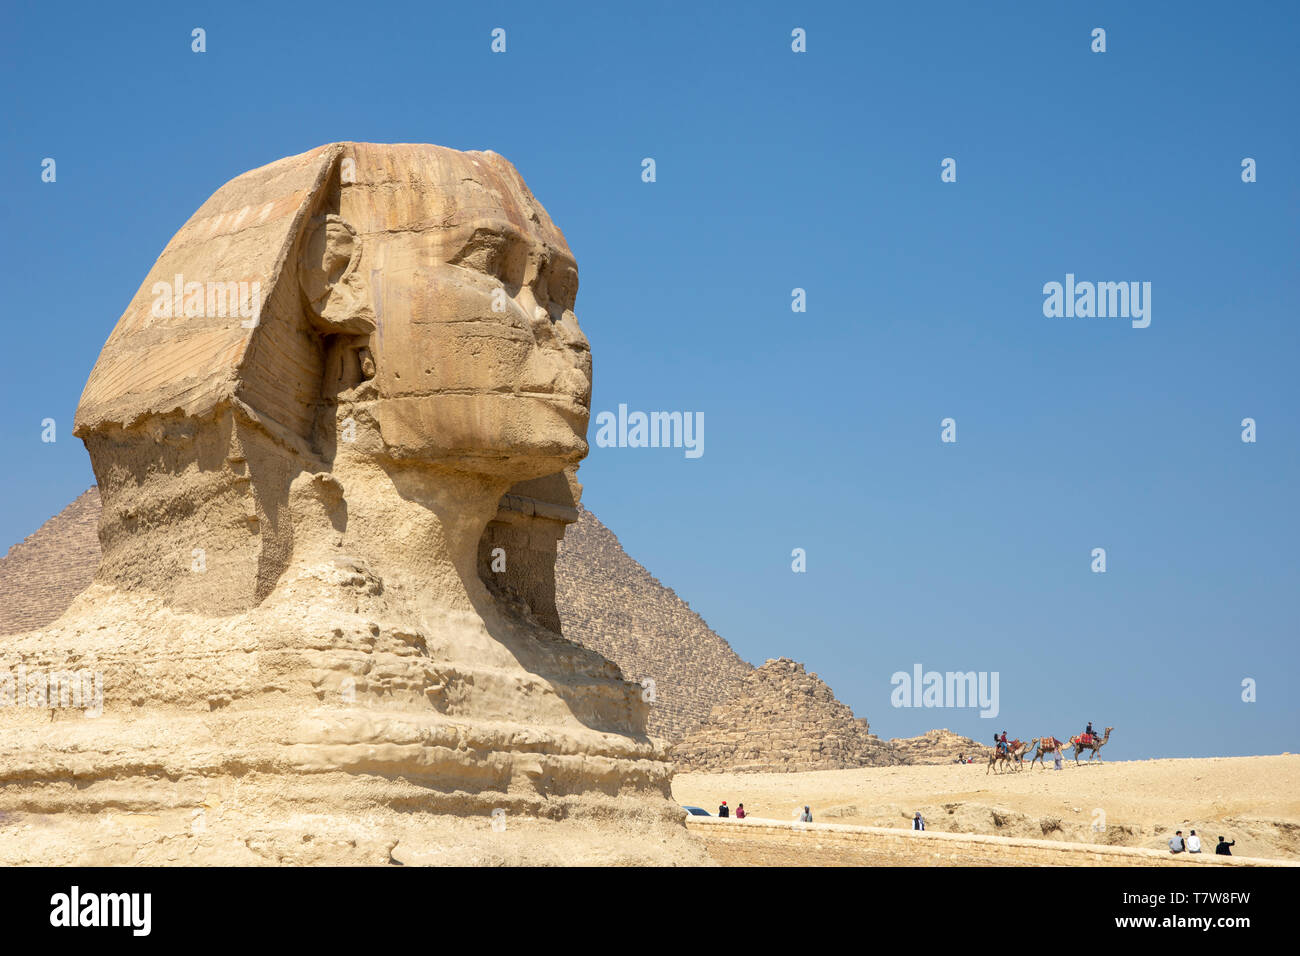 Visitors seem tiny as they pass near the Great Sphinx of Giza, said to have been created around 2500 BCE for Pharaoh Khafra. Stock Photo